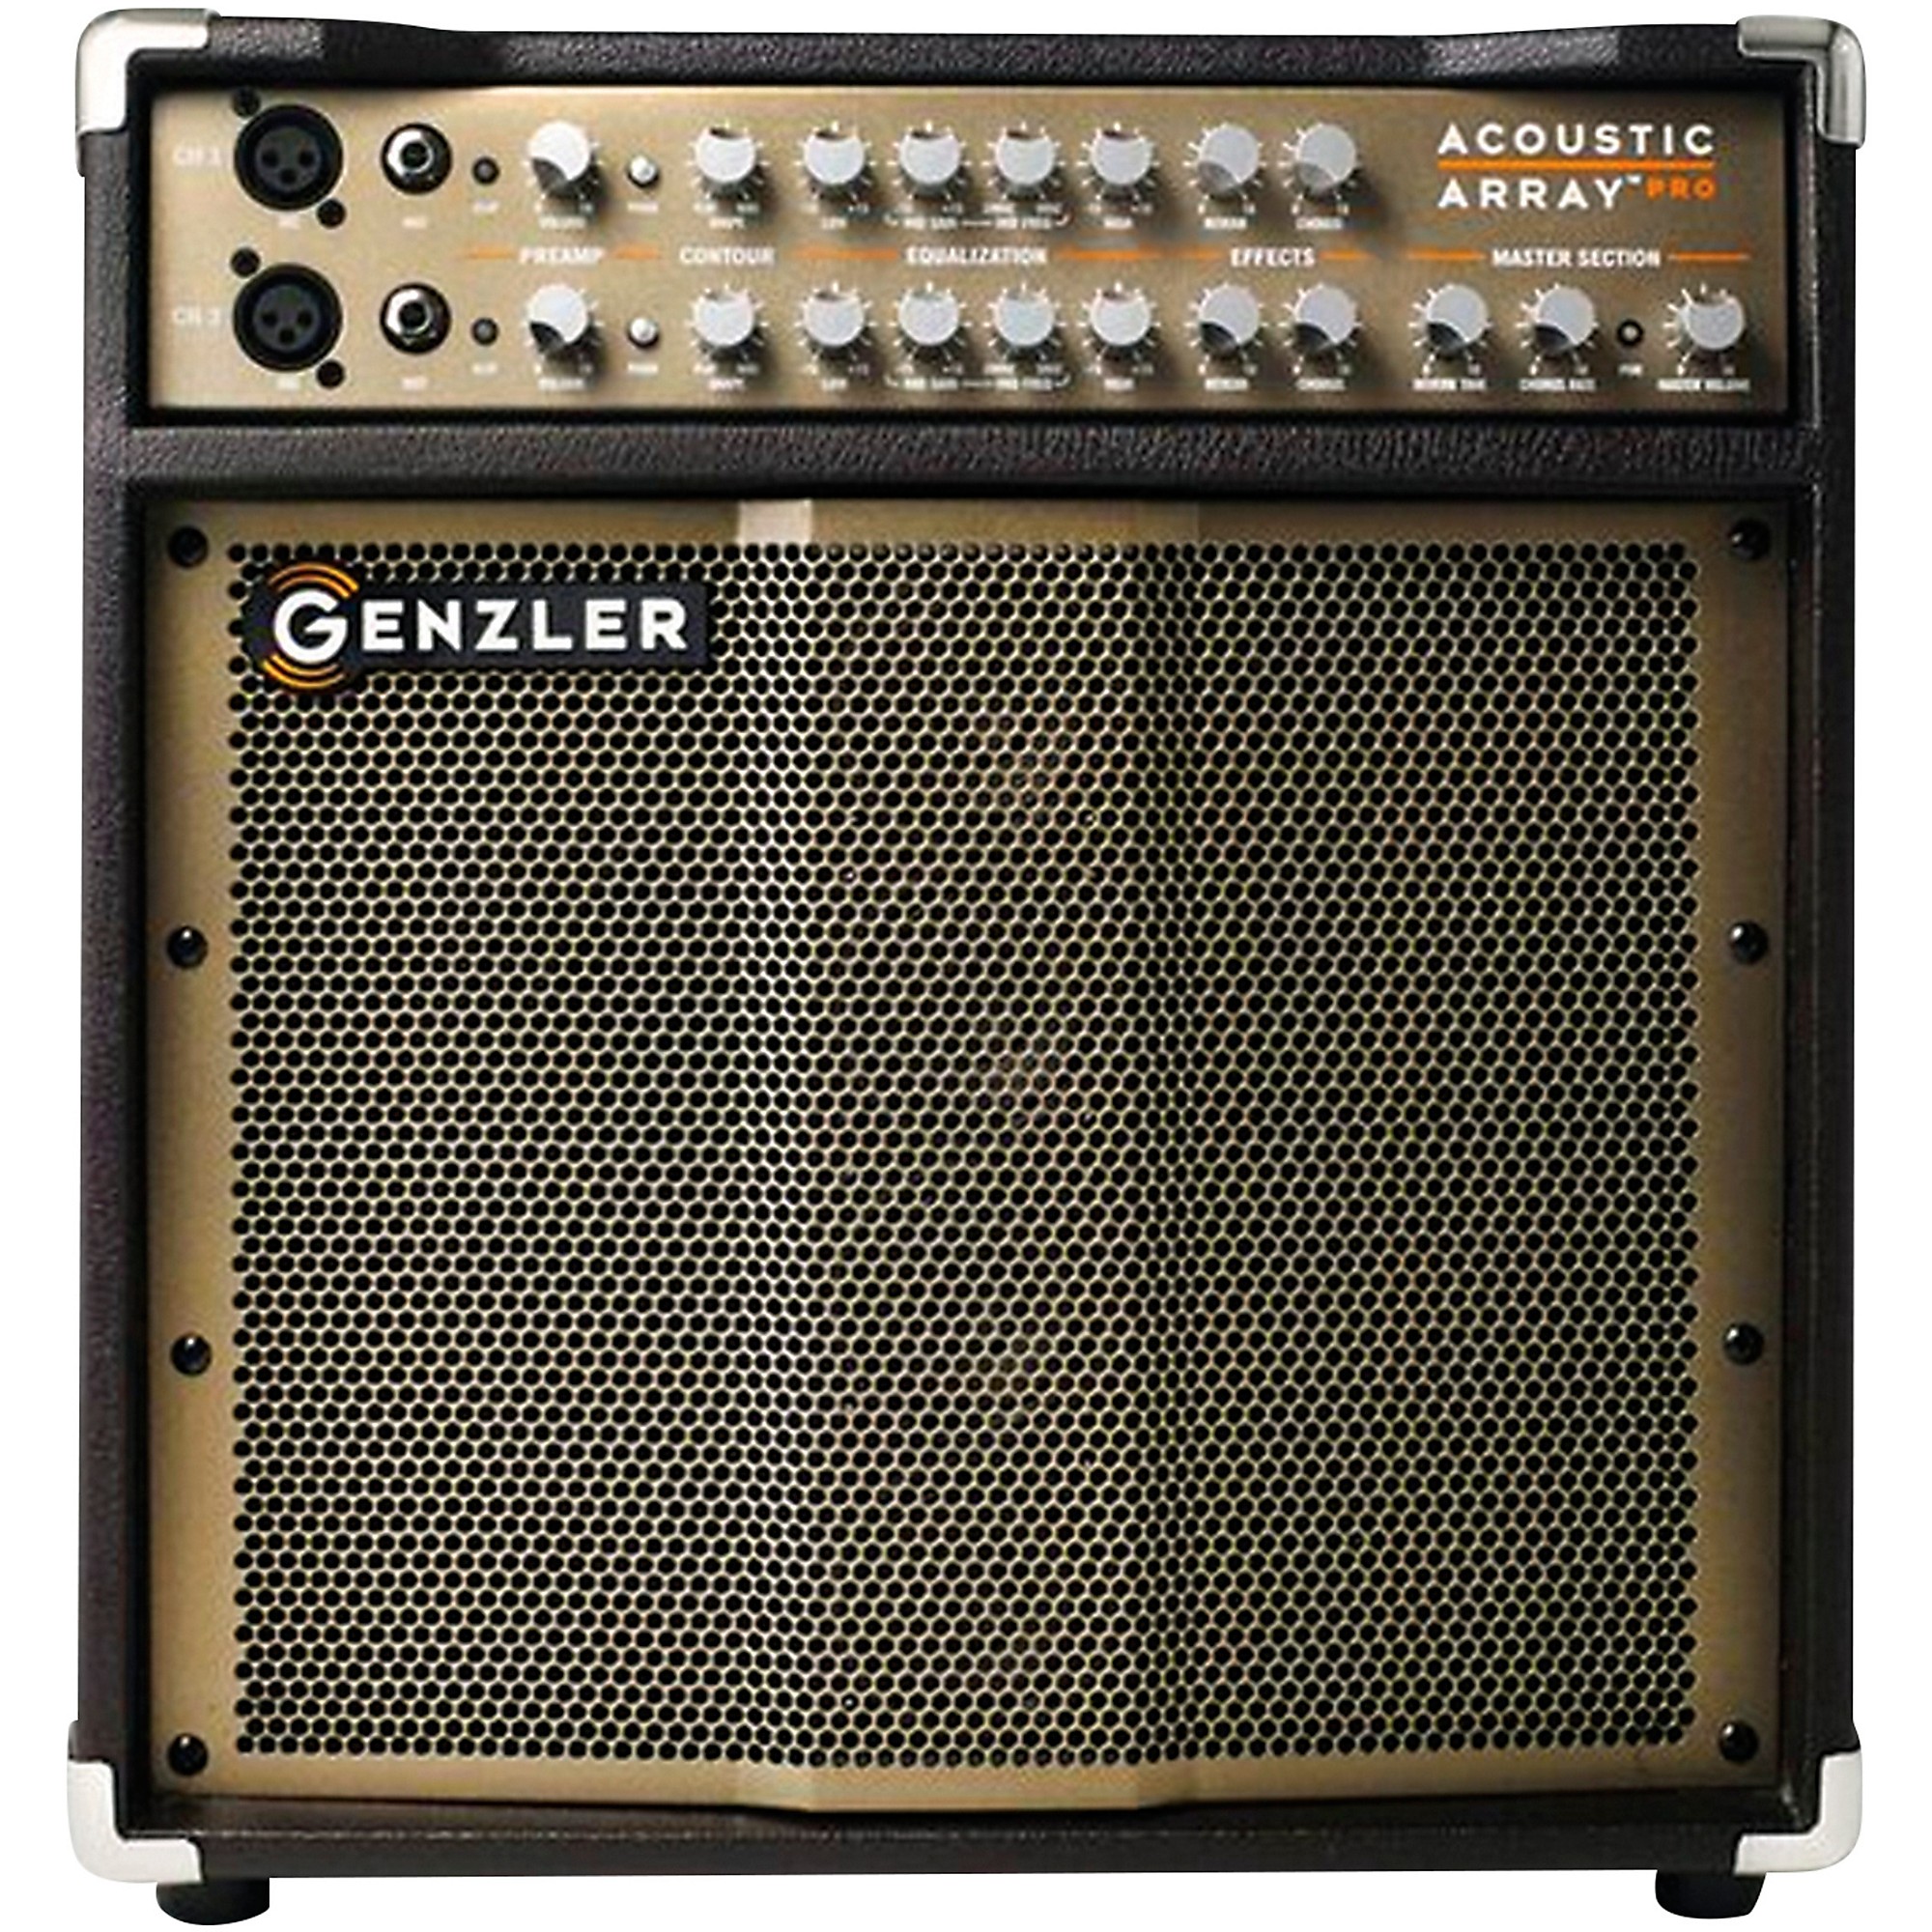 Open Genzler Amplification Acoustic Array PRO 1x10 with 4x3 Line Array Acoustic Guitar Combo Amp Level 1 Brown Guitar Center